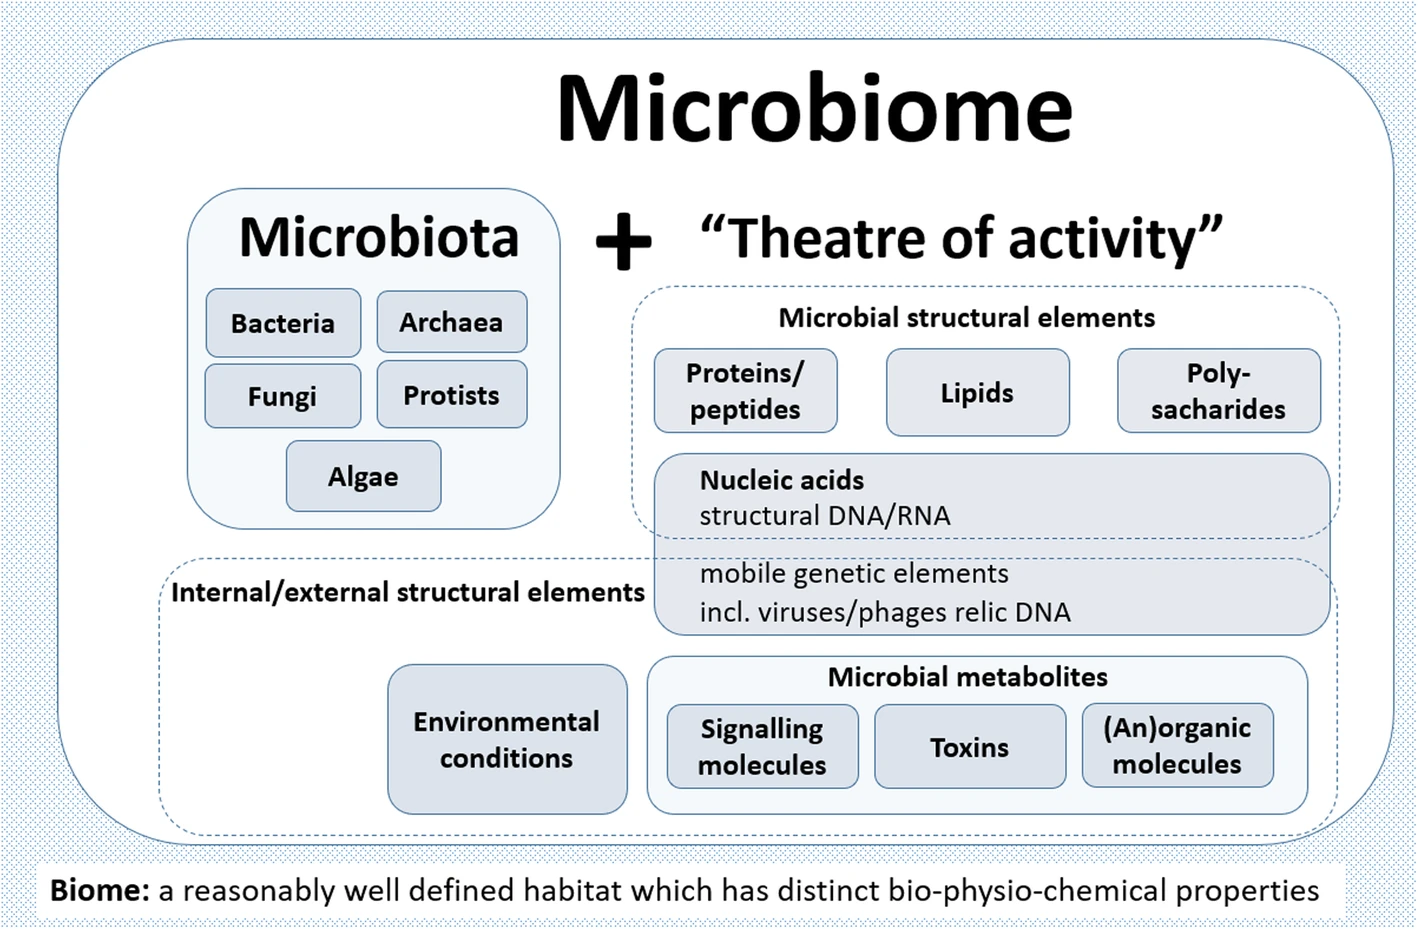 The term microbiome encompasses both the microbiota (community of microorganisms) and their “theatre of activity” (structural elements, metabolites/signal molecules, and the surrounding environmental conditions.